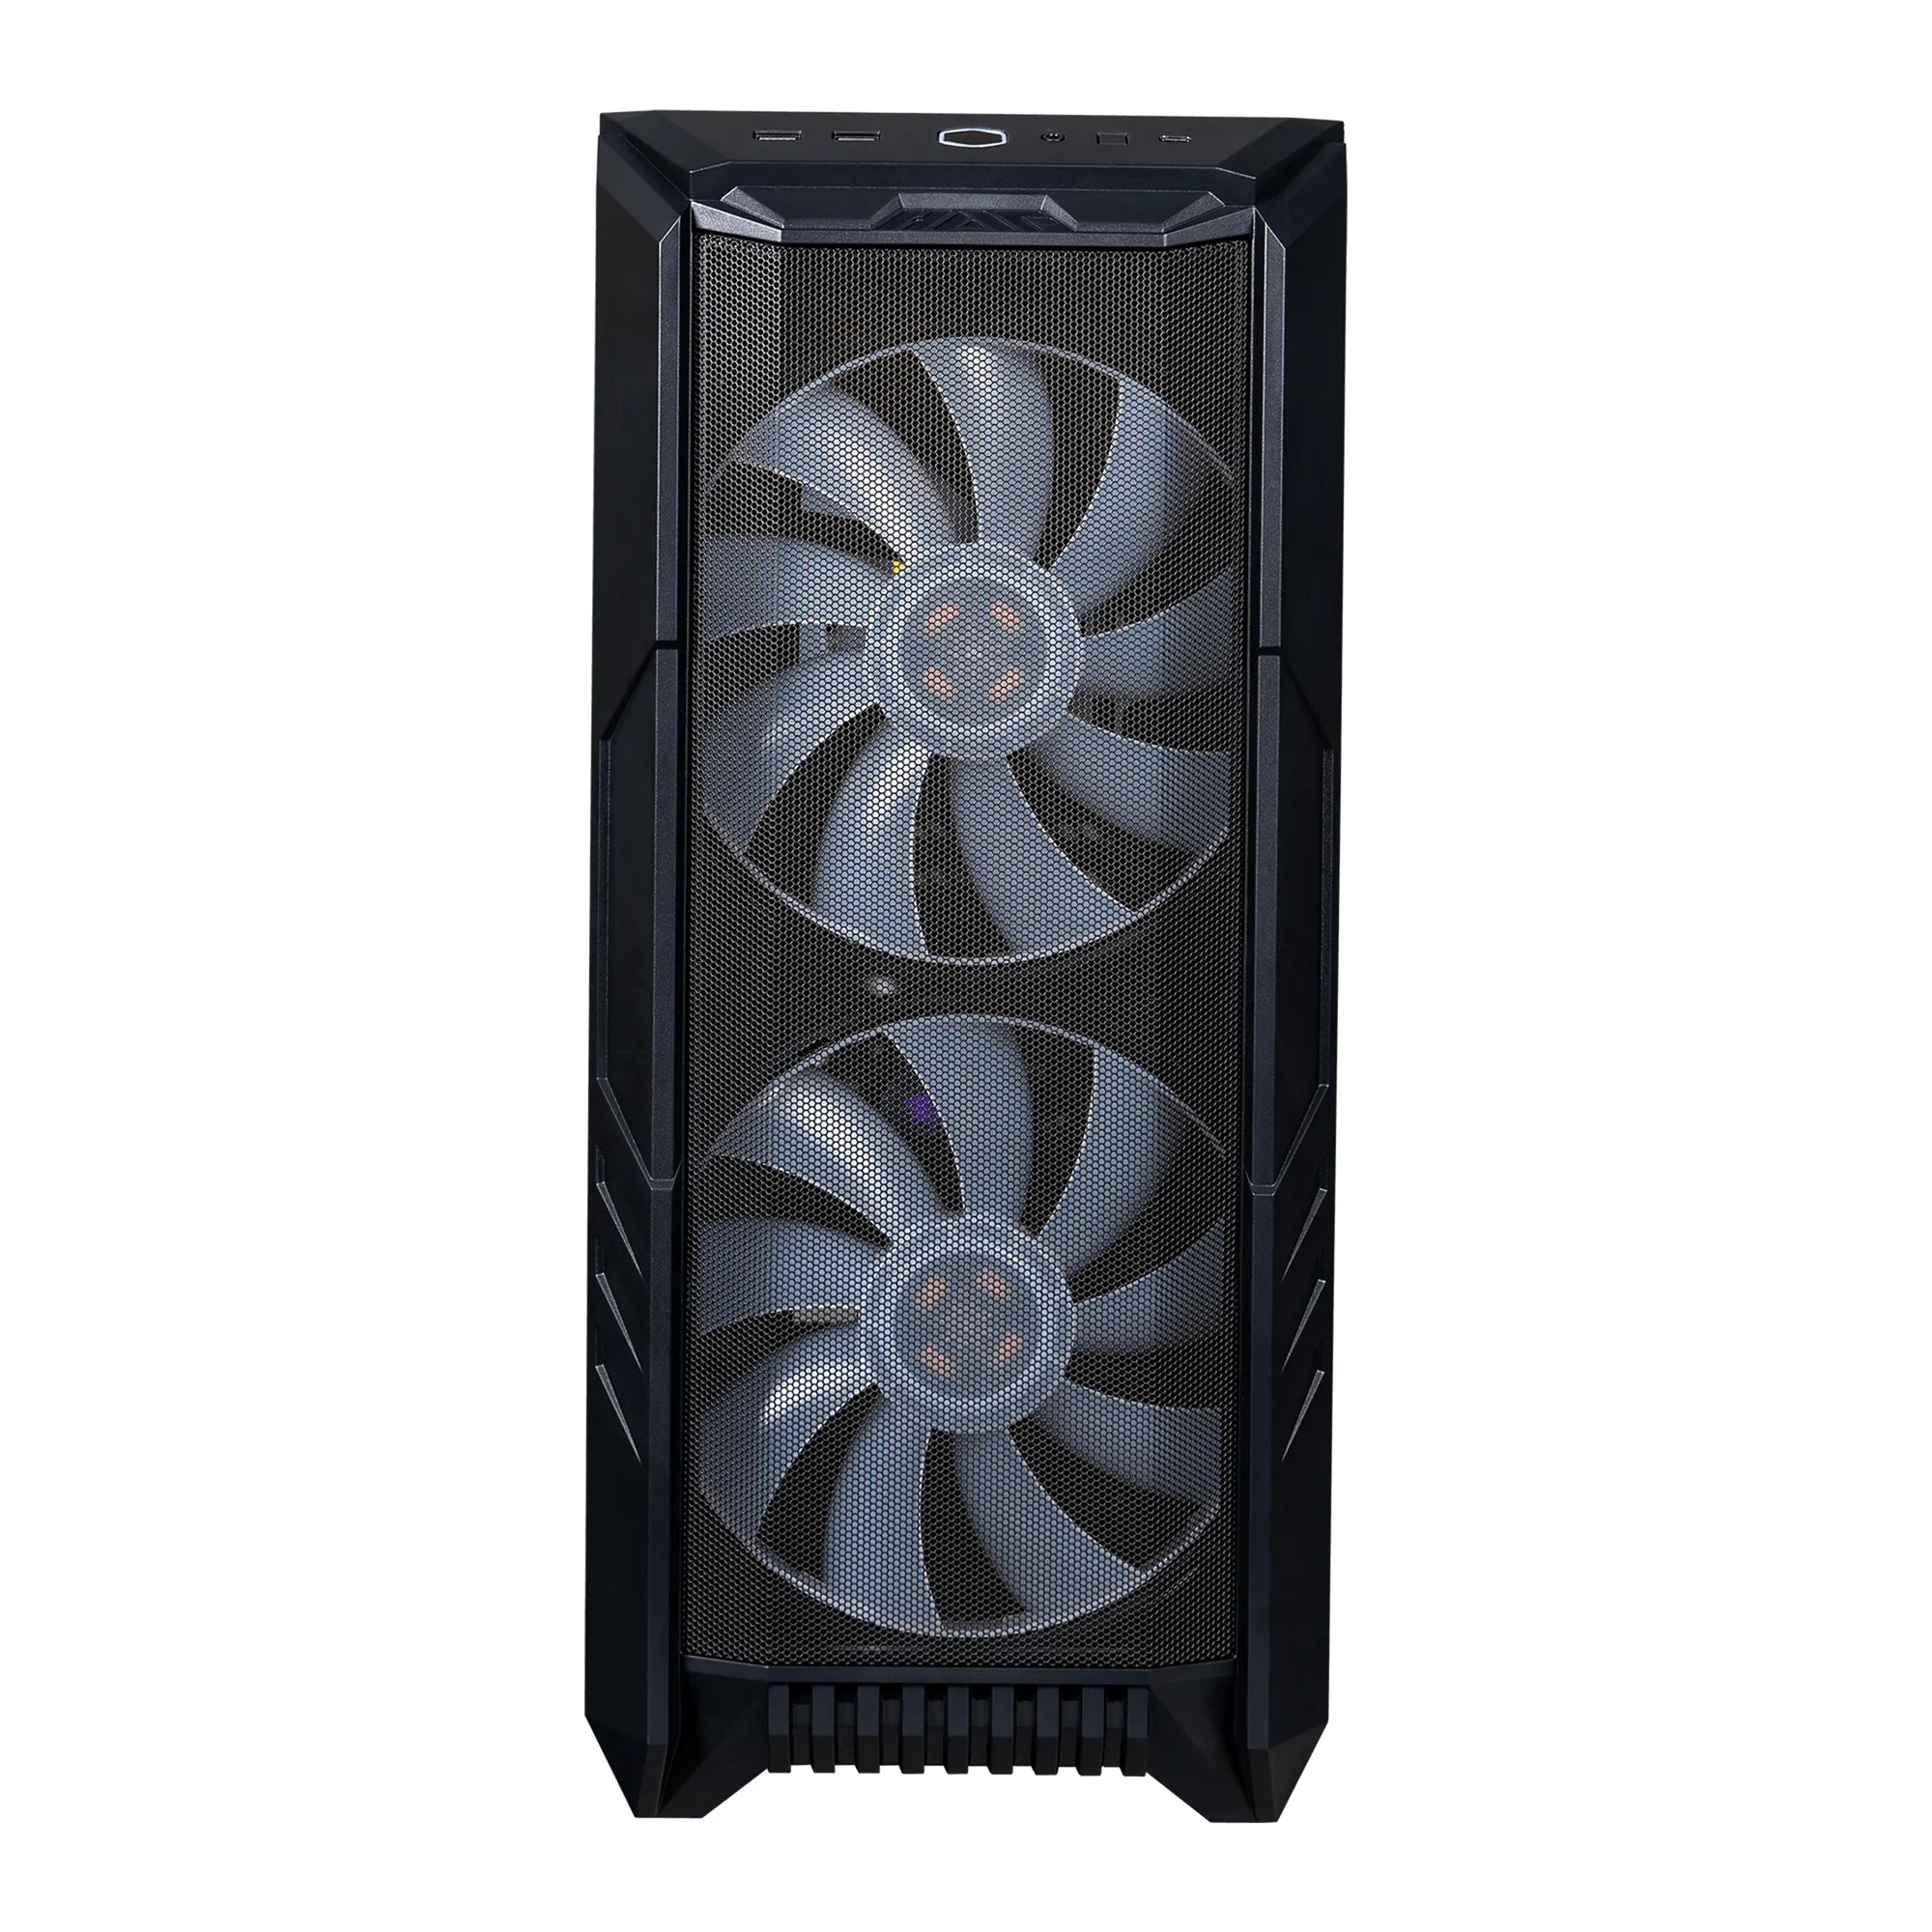 Cooler-Master-MasterCase-H500;-2-x-200mm-rgb-fans-with-controller;-ATX;-Case-handle;-Mesh-and-Transparent-covers;-Iron-Grey